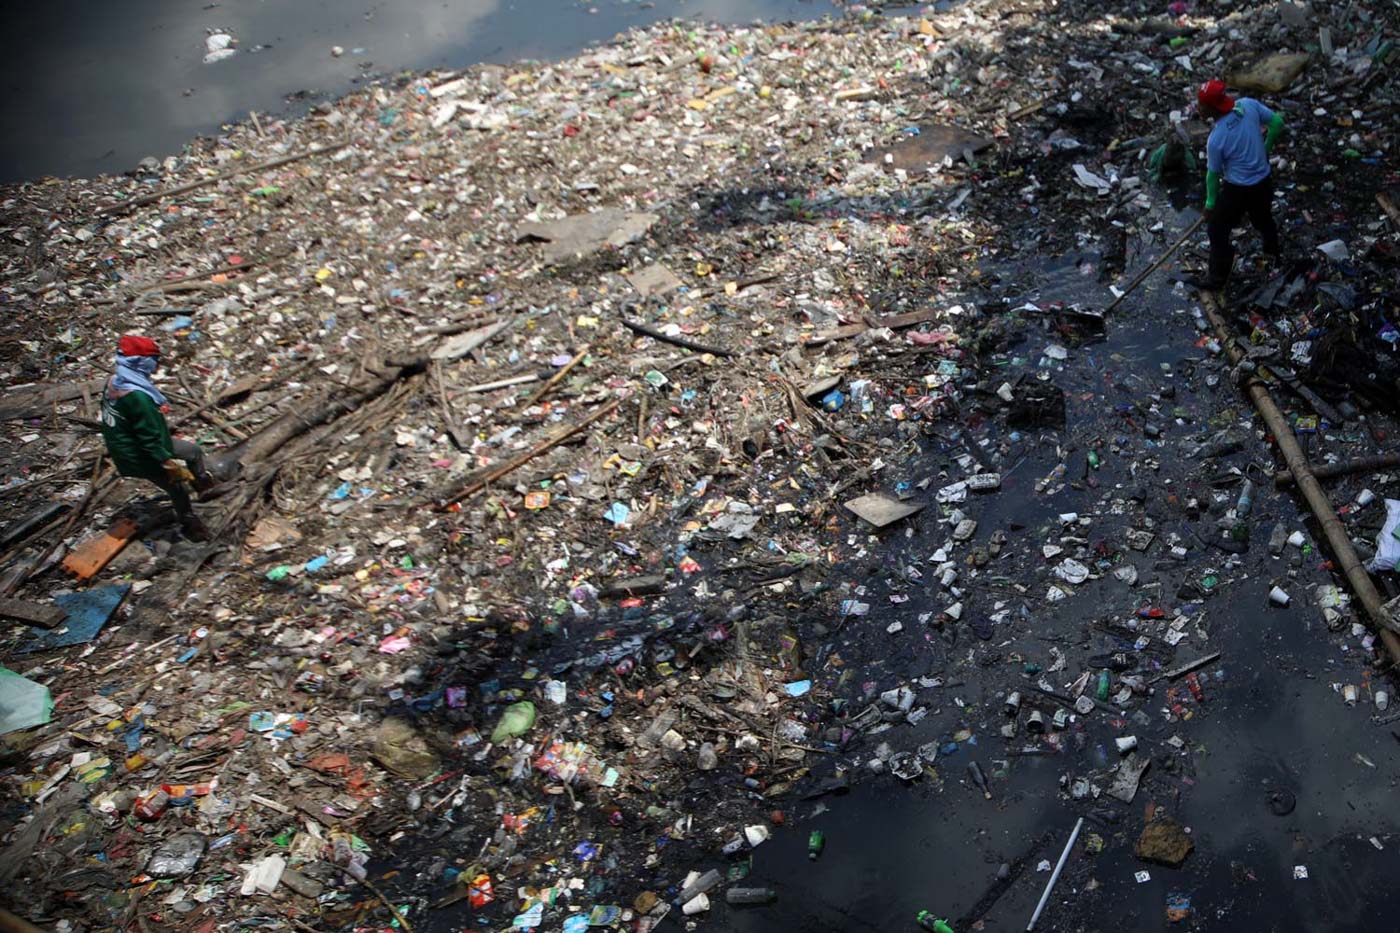 Pasig River is the most polluted river in the Philippines (Ph). History